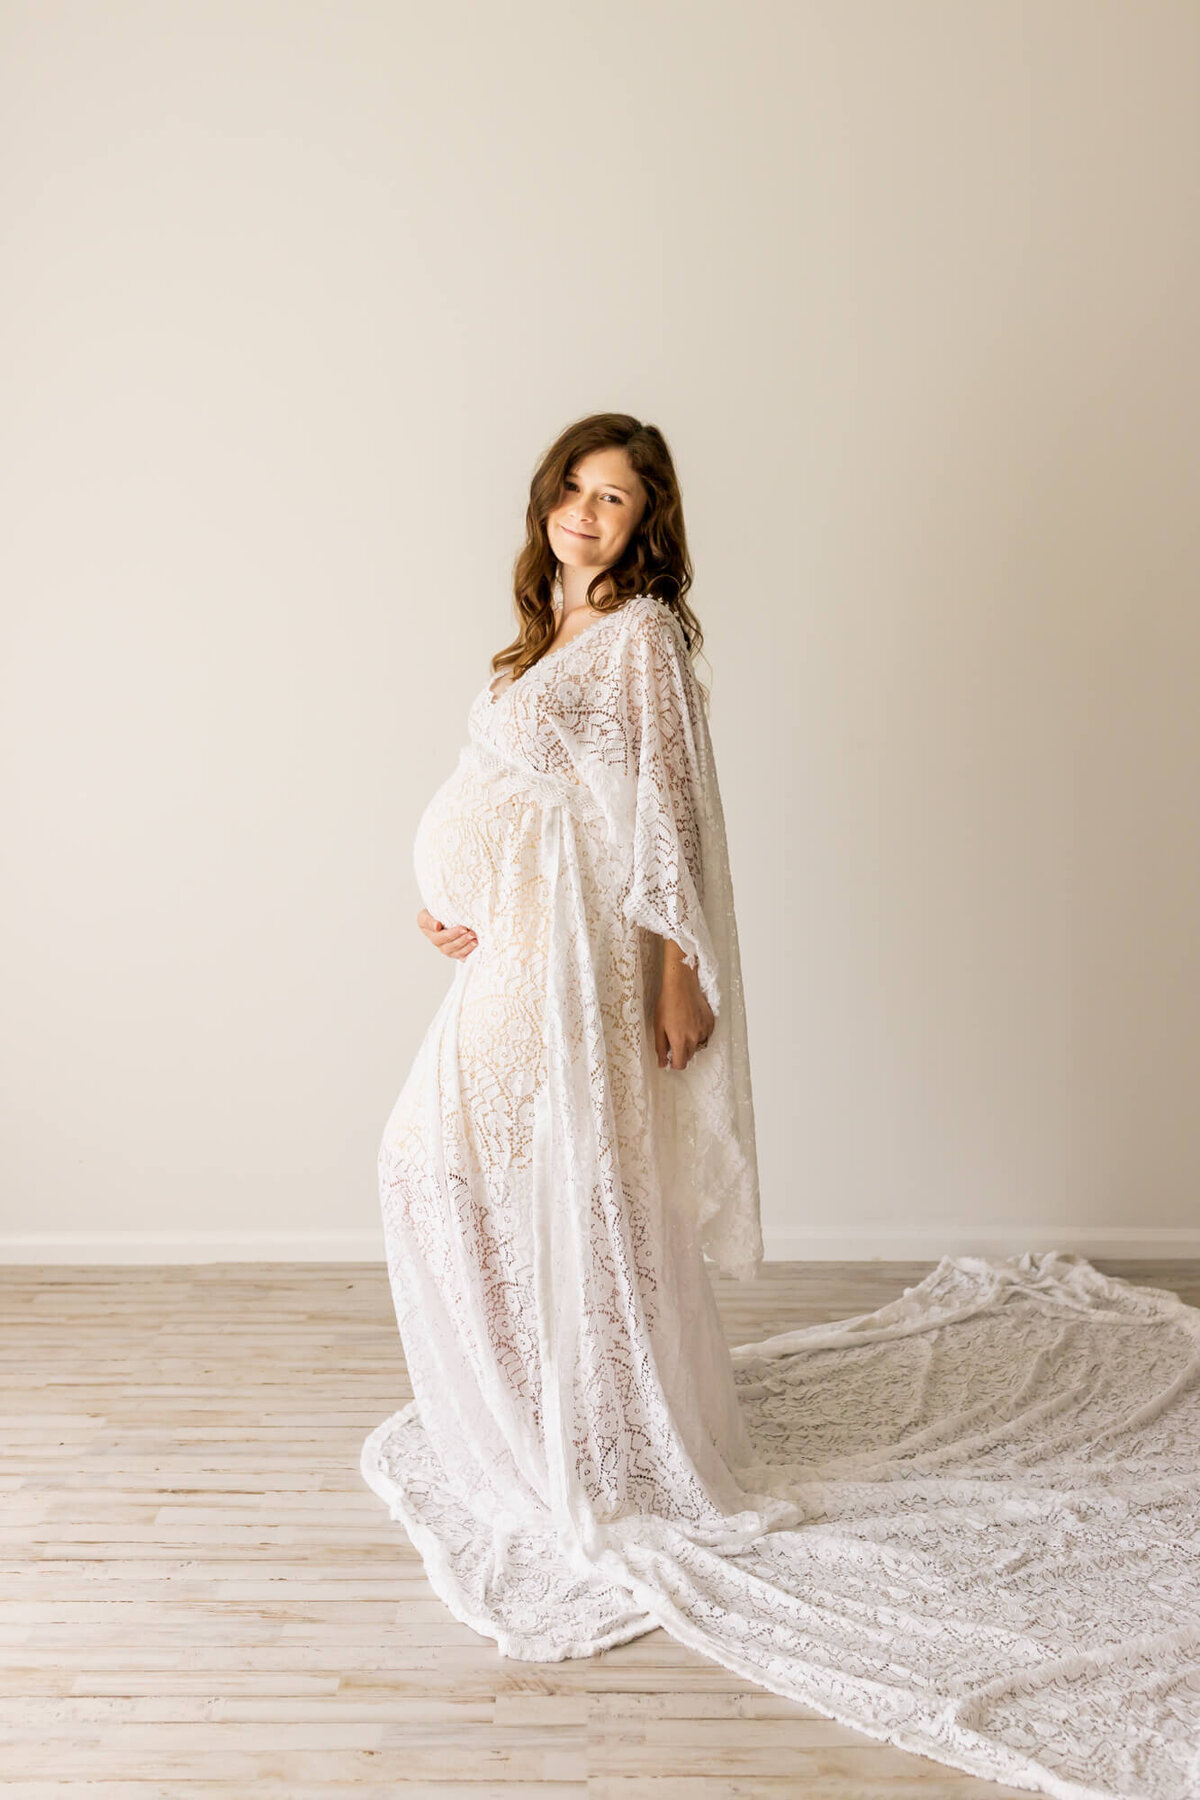 Mom to be in a white lace boho maternity dress